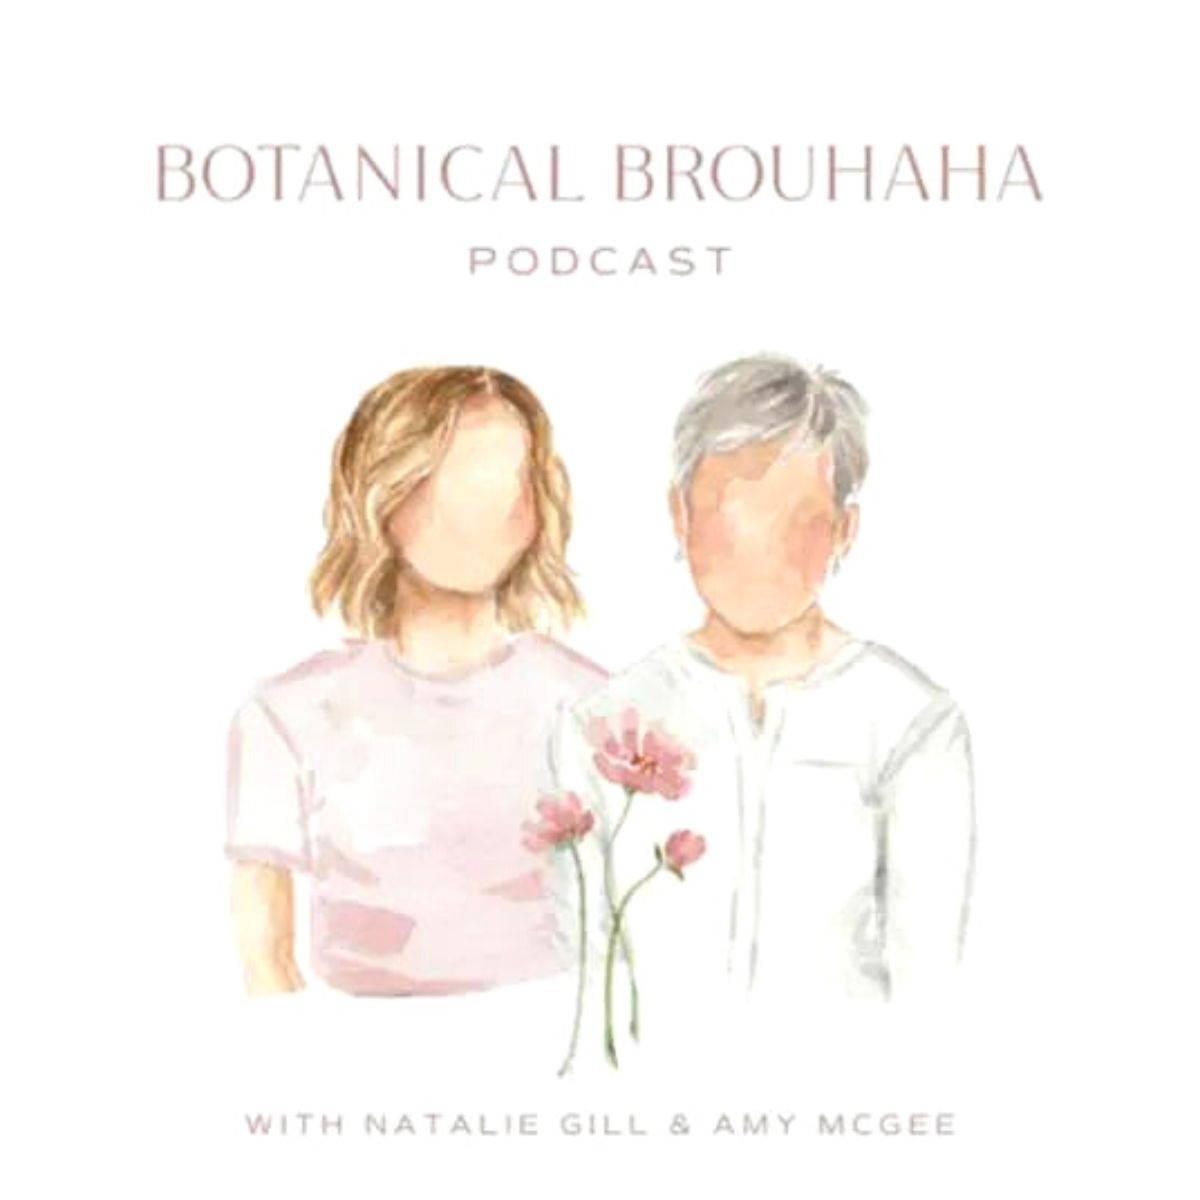 Botanical Brouhaha podcast by Natalie Gill